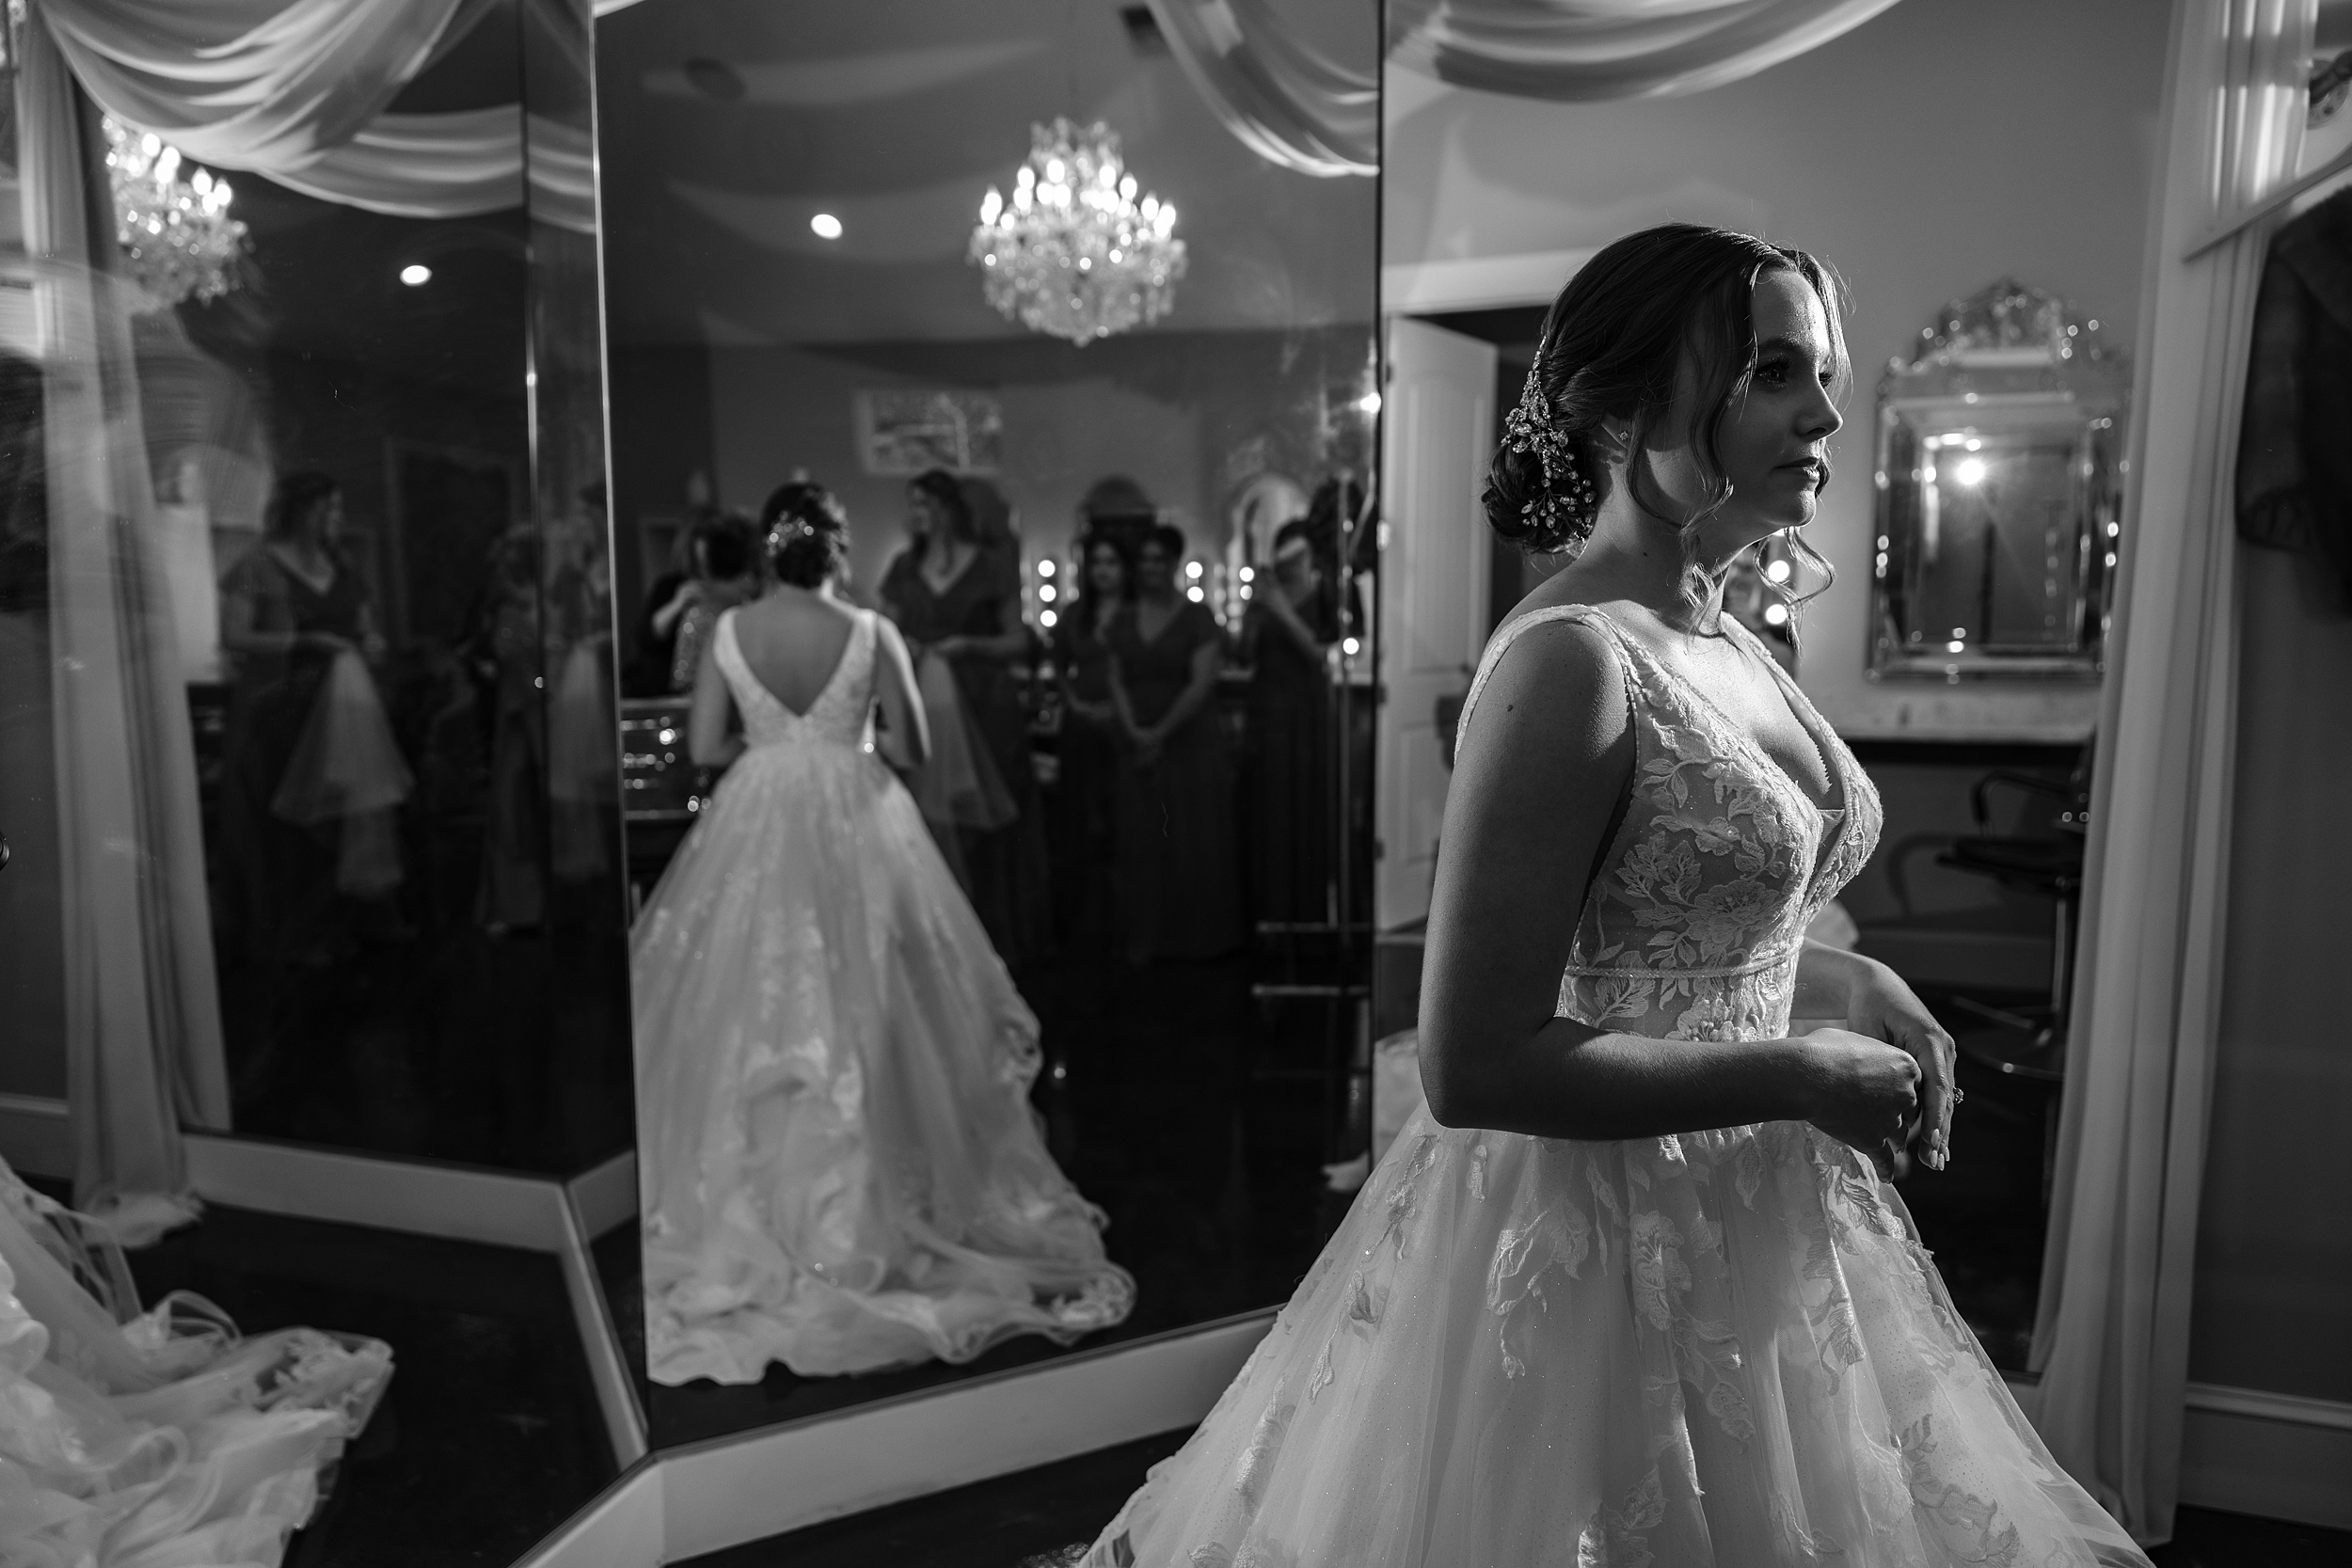 A bride stands in a large mirror while getting ready with her party